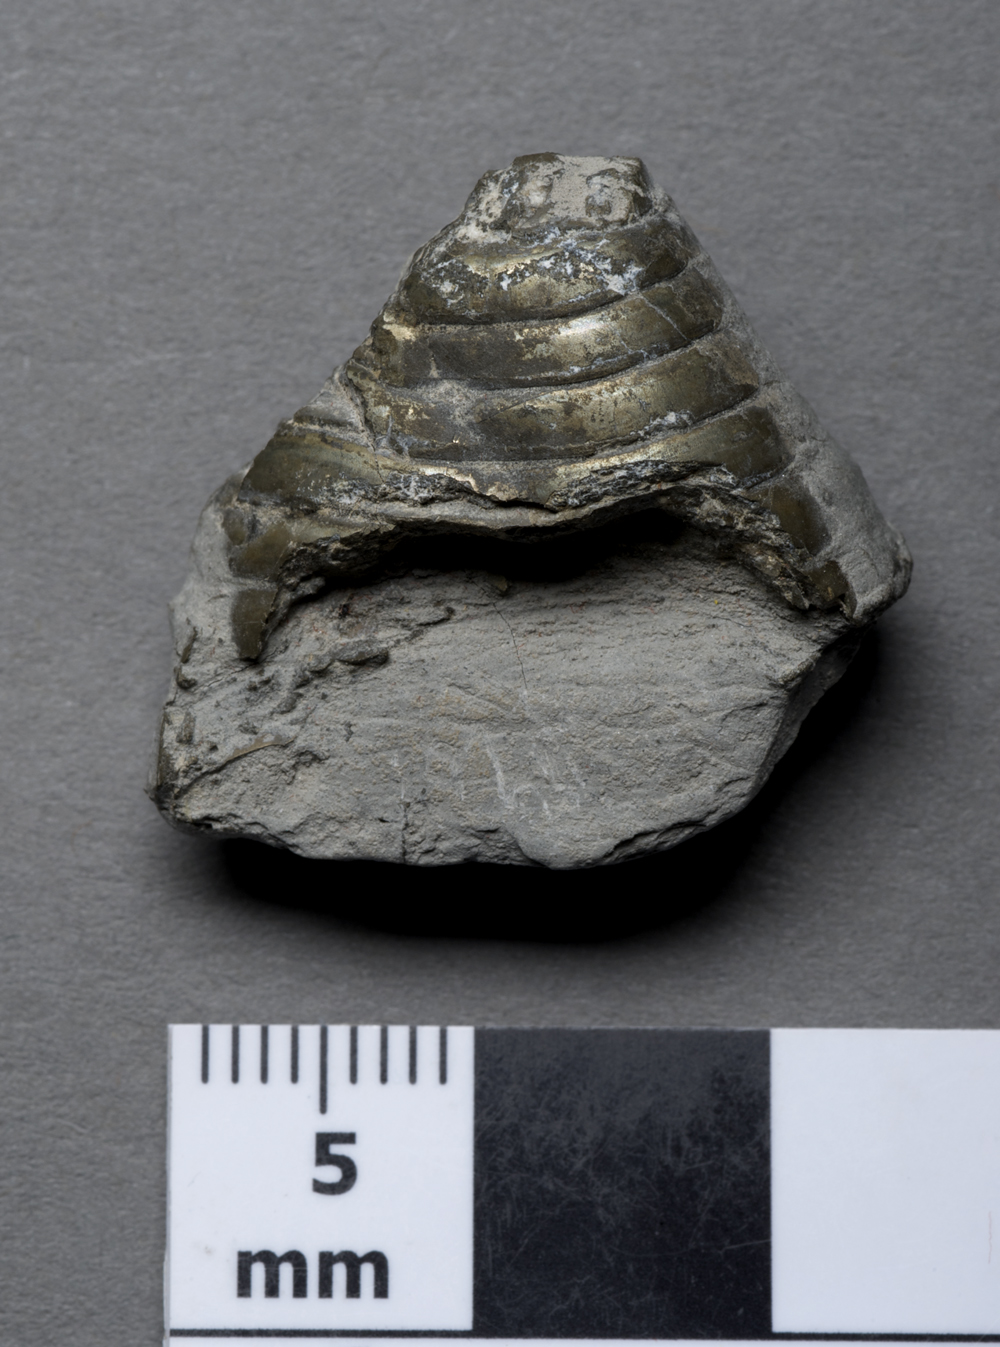 the phragmocone or chambered shell which sat inside the solid shell (guard)